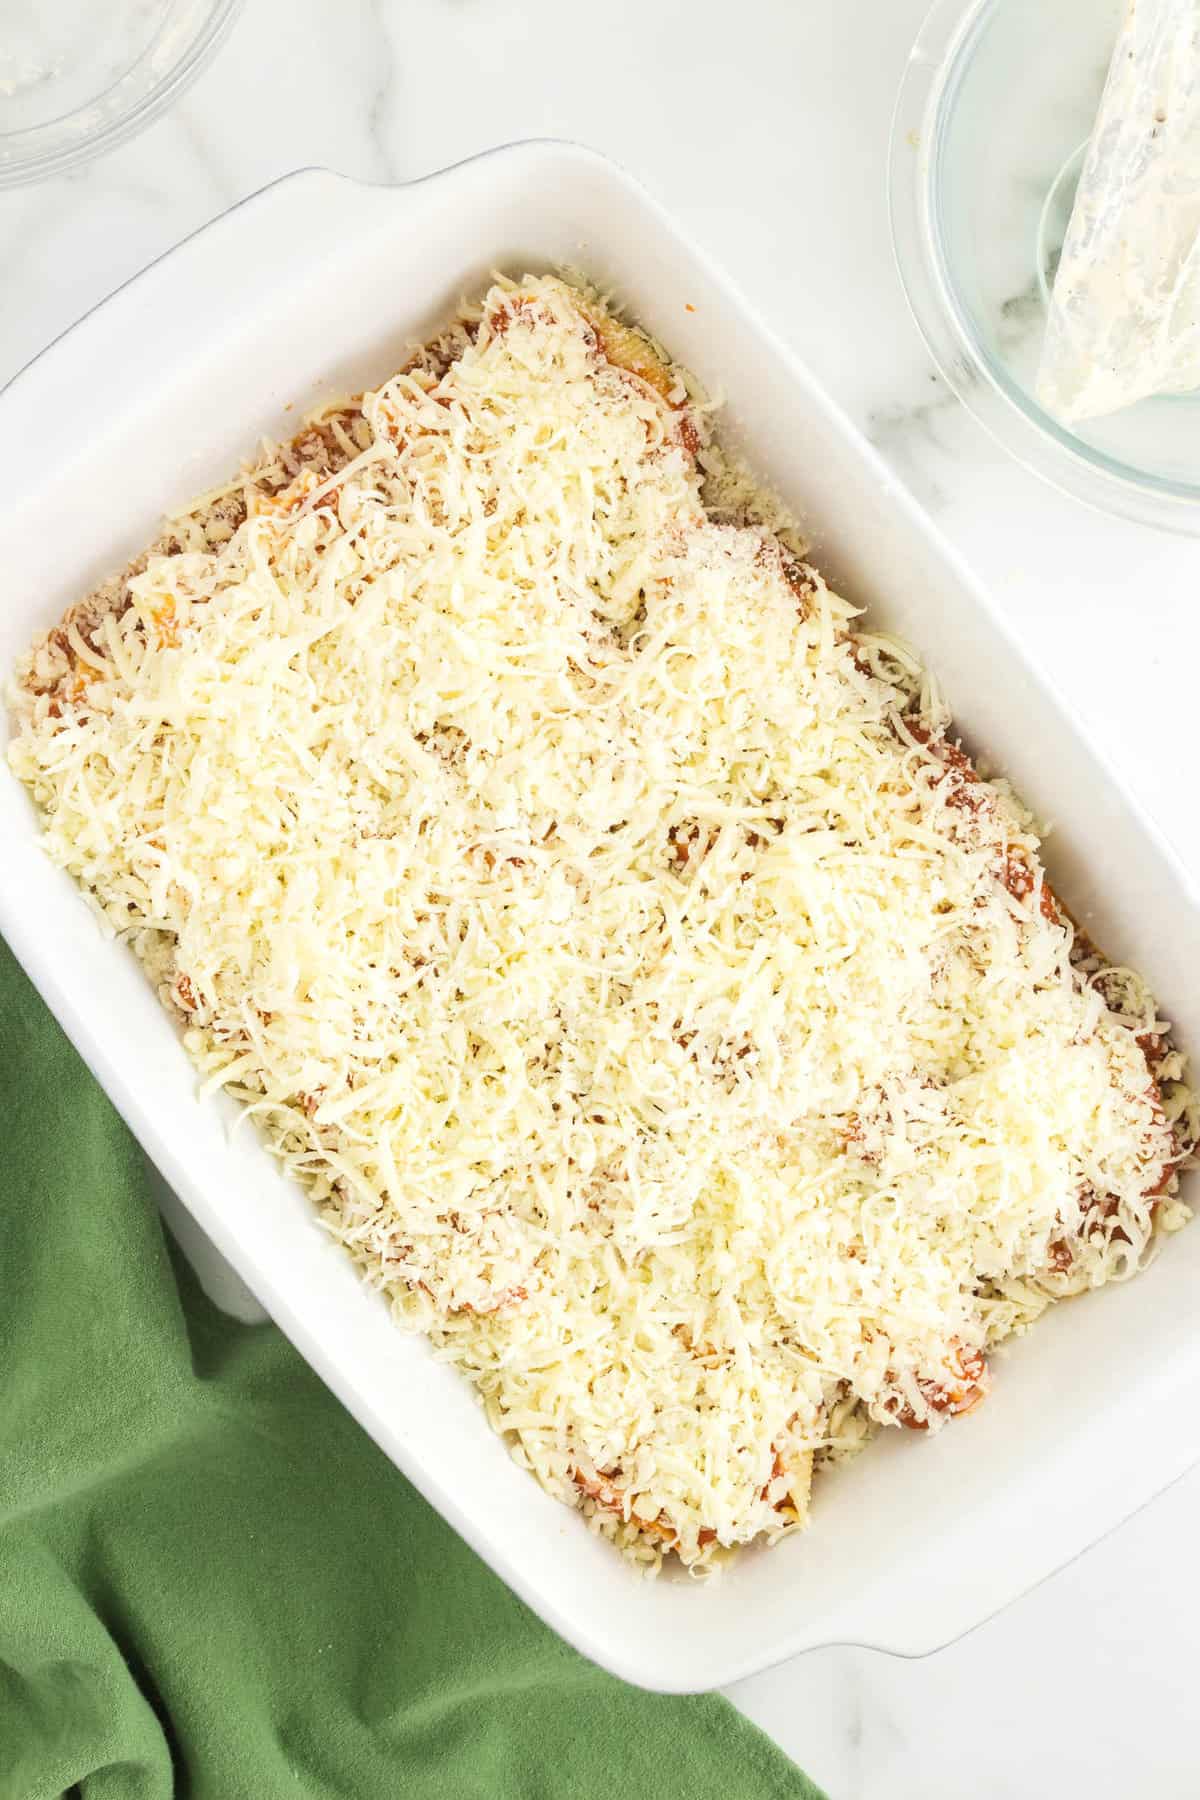 Shredded Cheese Covering Pasta for Stuffed Shells Recipe